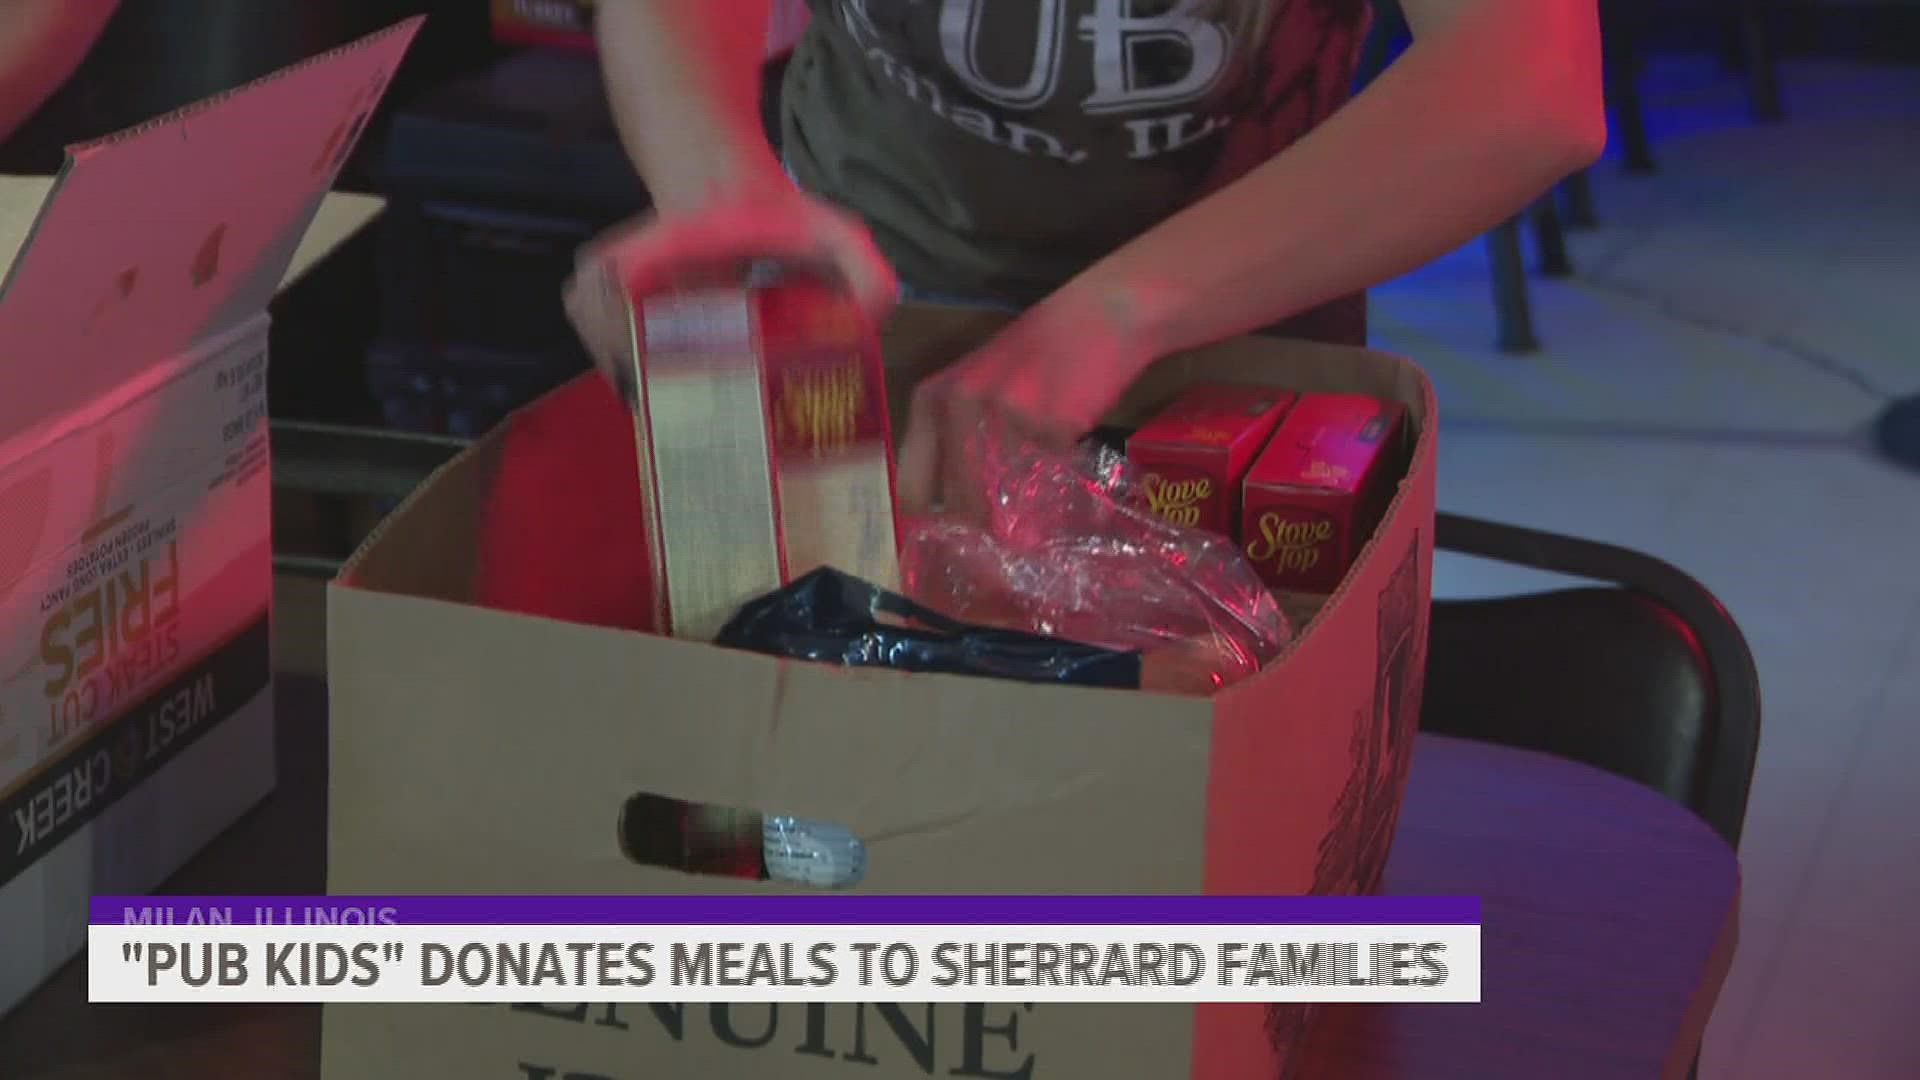 The group has helped serve meals to 100 families at five schools near the Quad Cities.